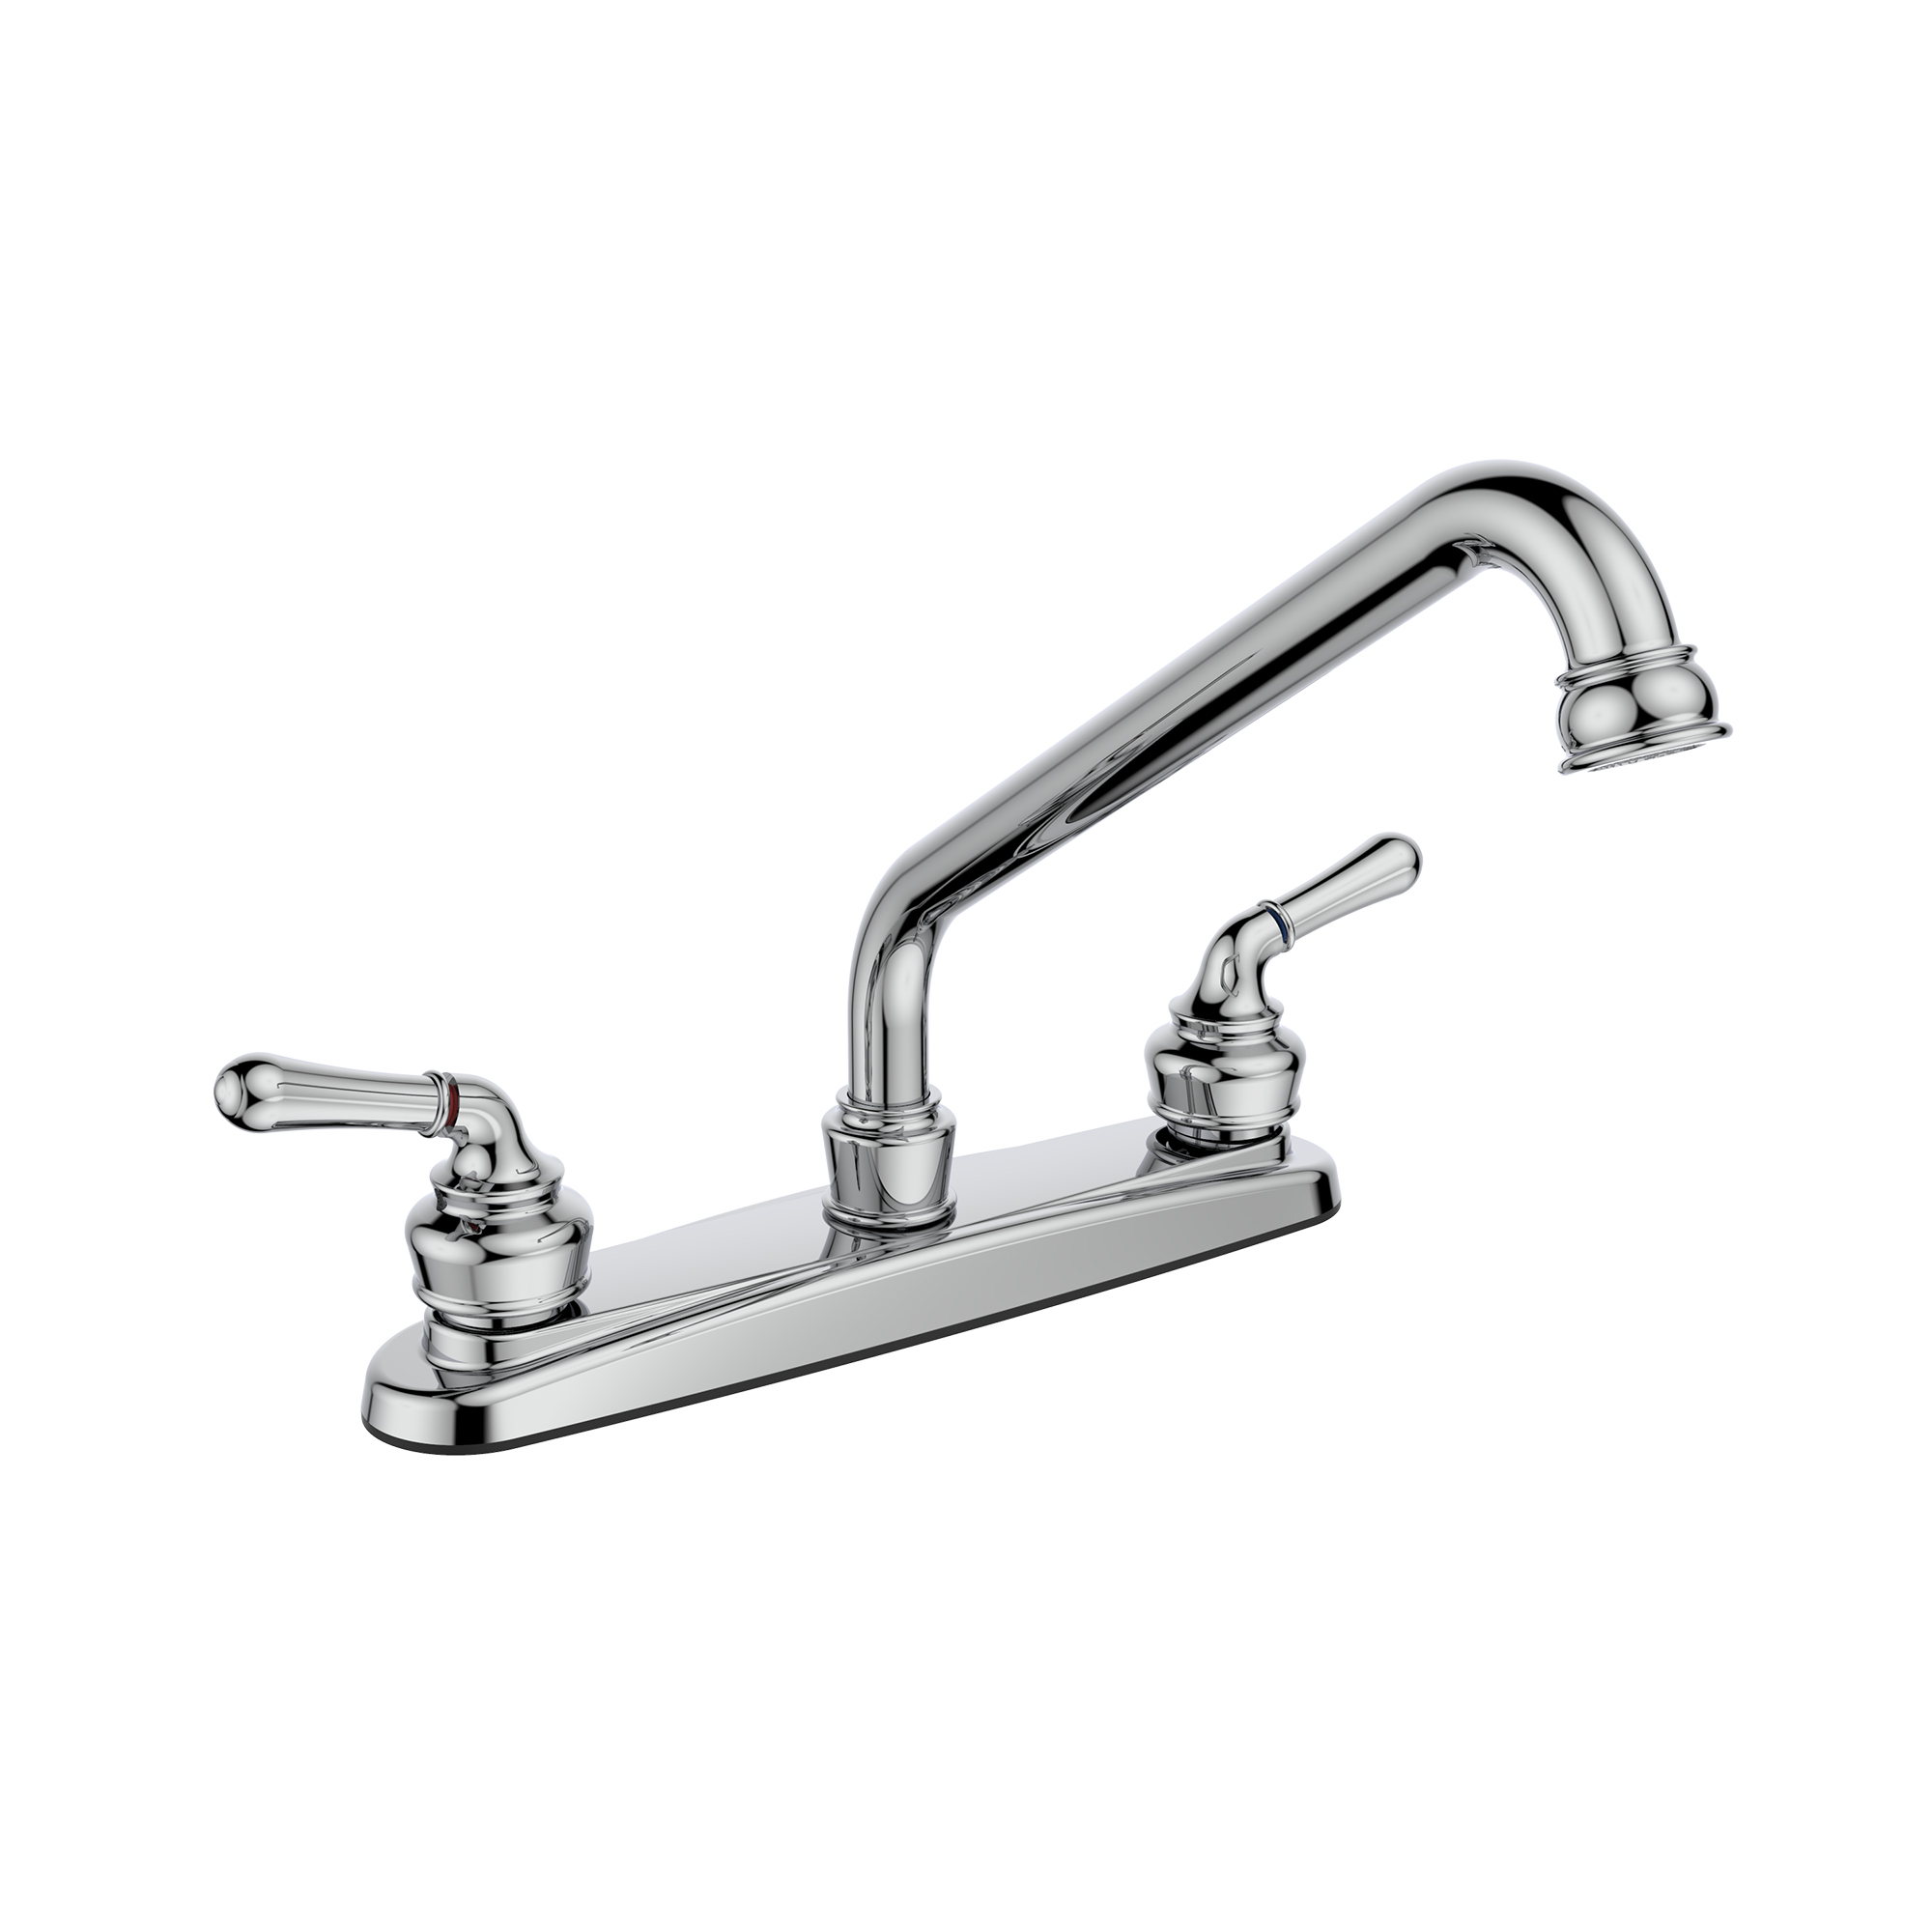 21465w 2.5 X 12 X 15.5 In. Kitchen Sink Faucet With Low Arc Spout & 2 Handles, Polished Chrome